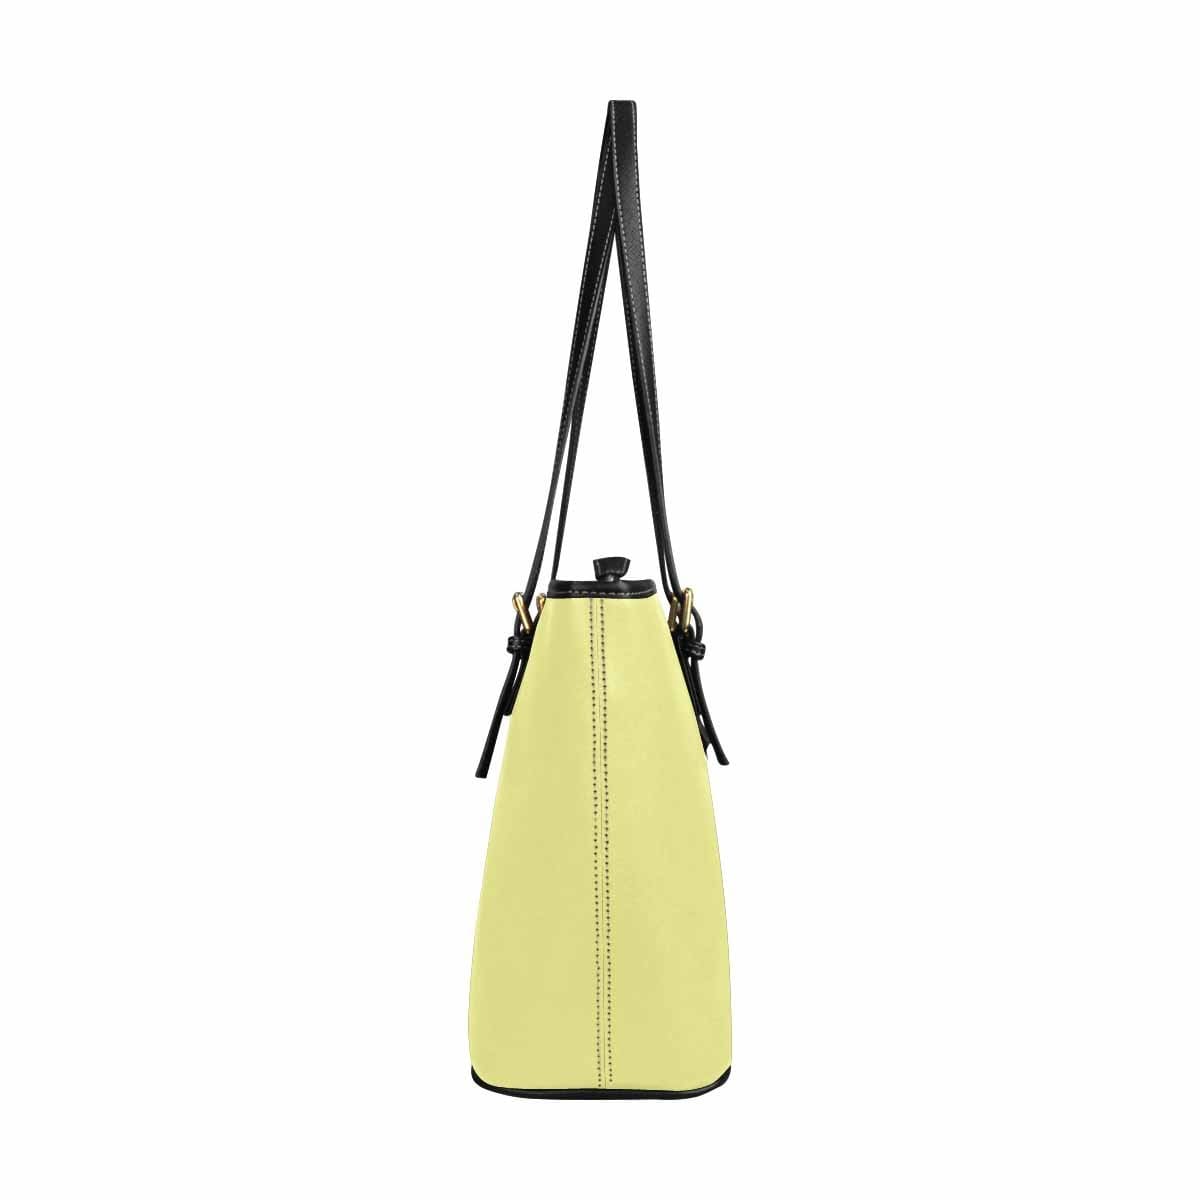 Large Leather Tote Shoulder Bag - Pastel Yellow - Bags | Leather Tote Bags